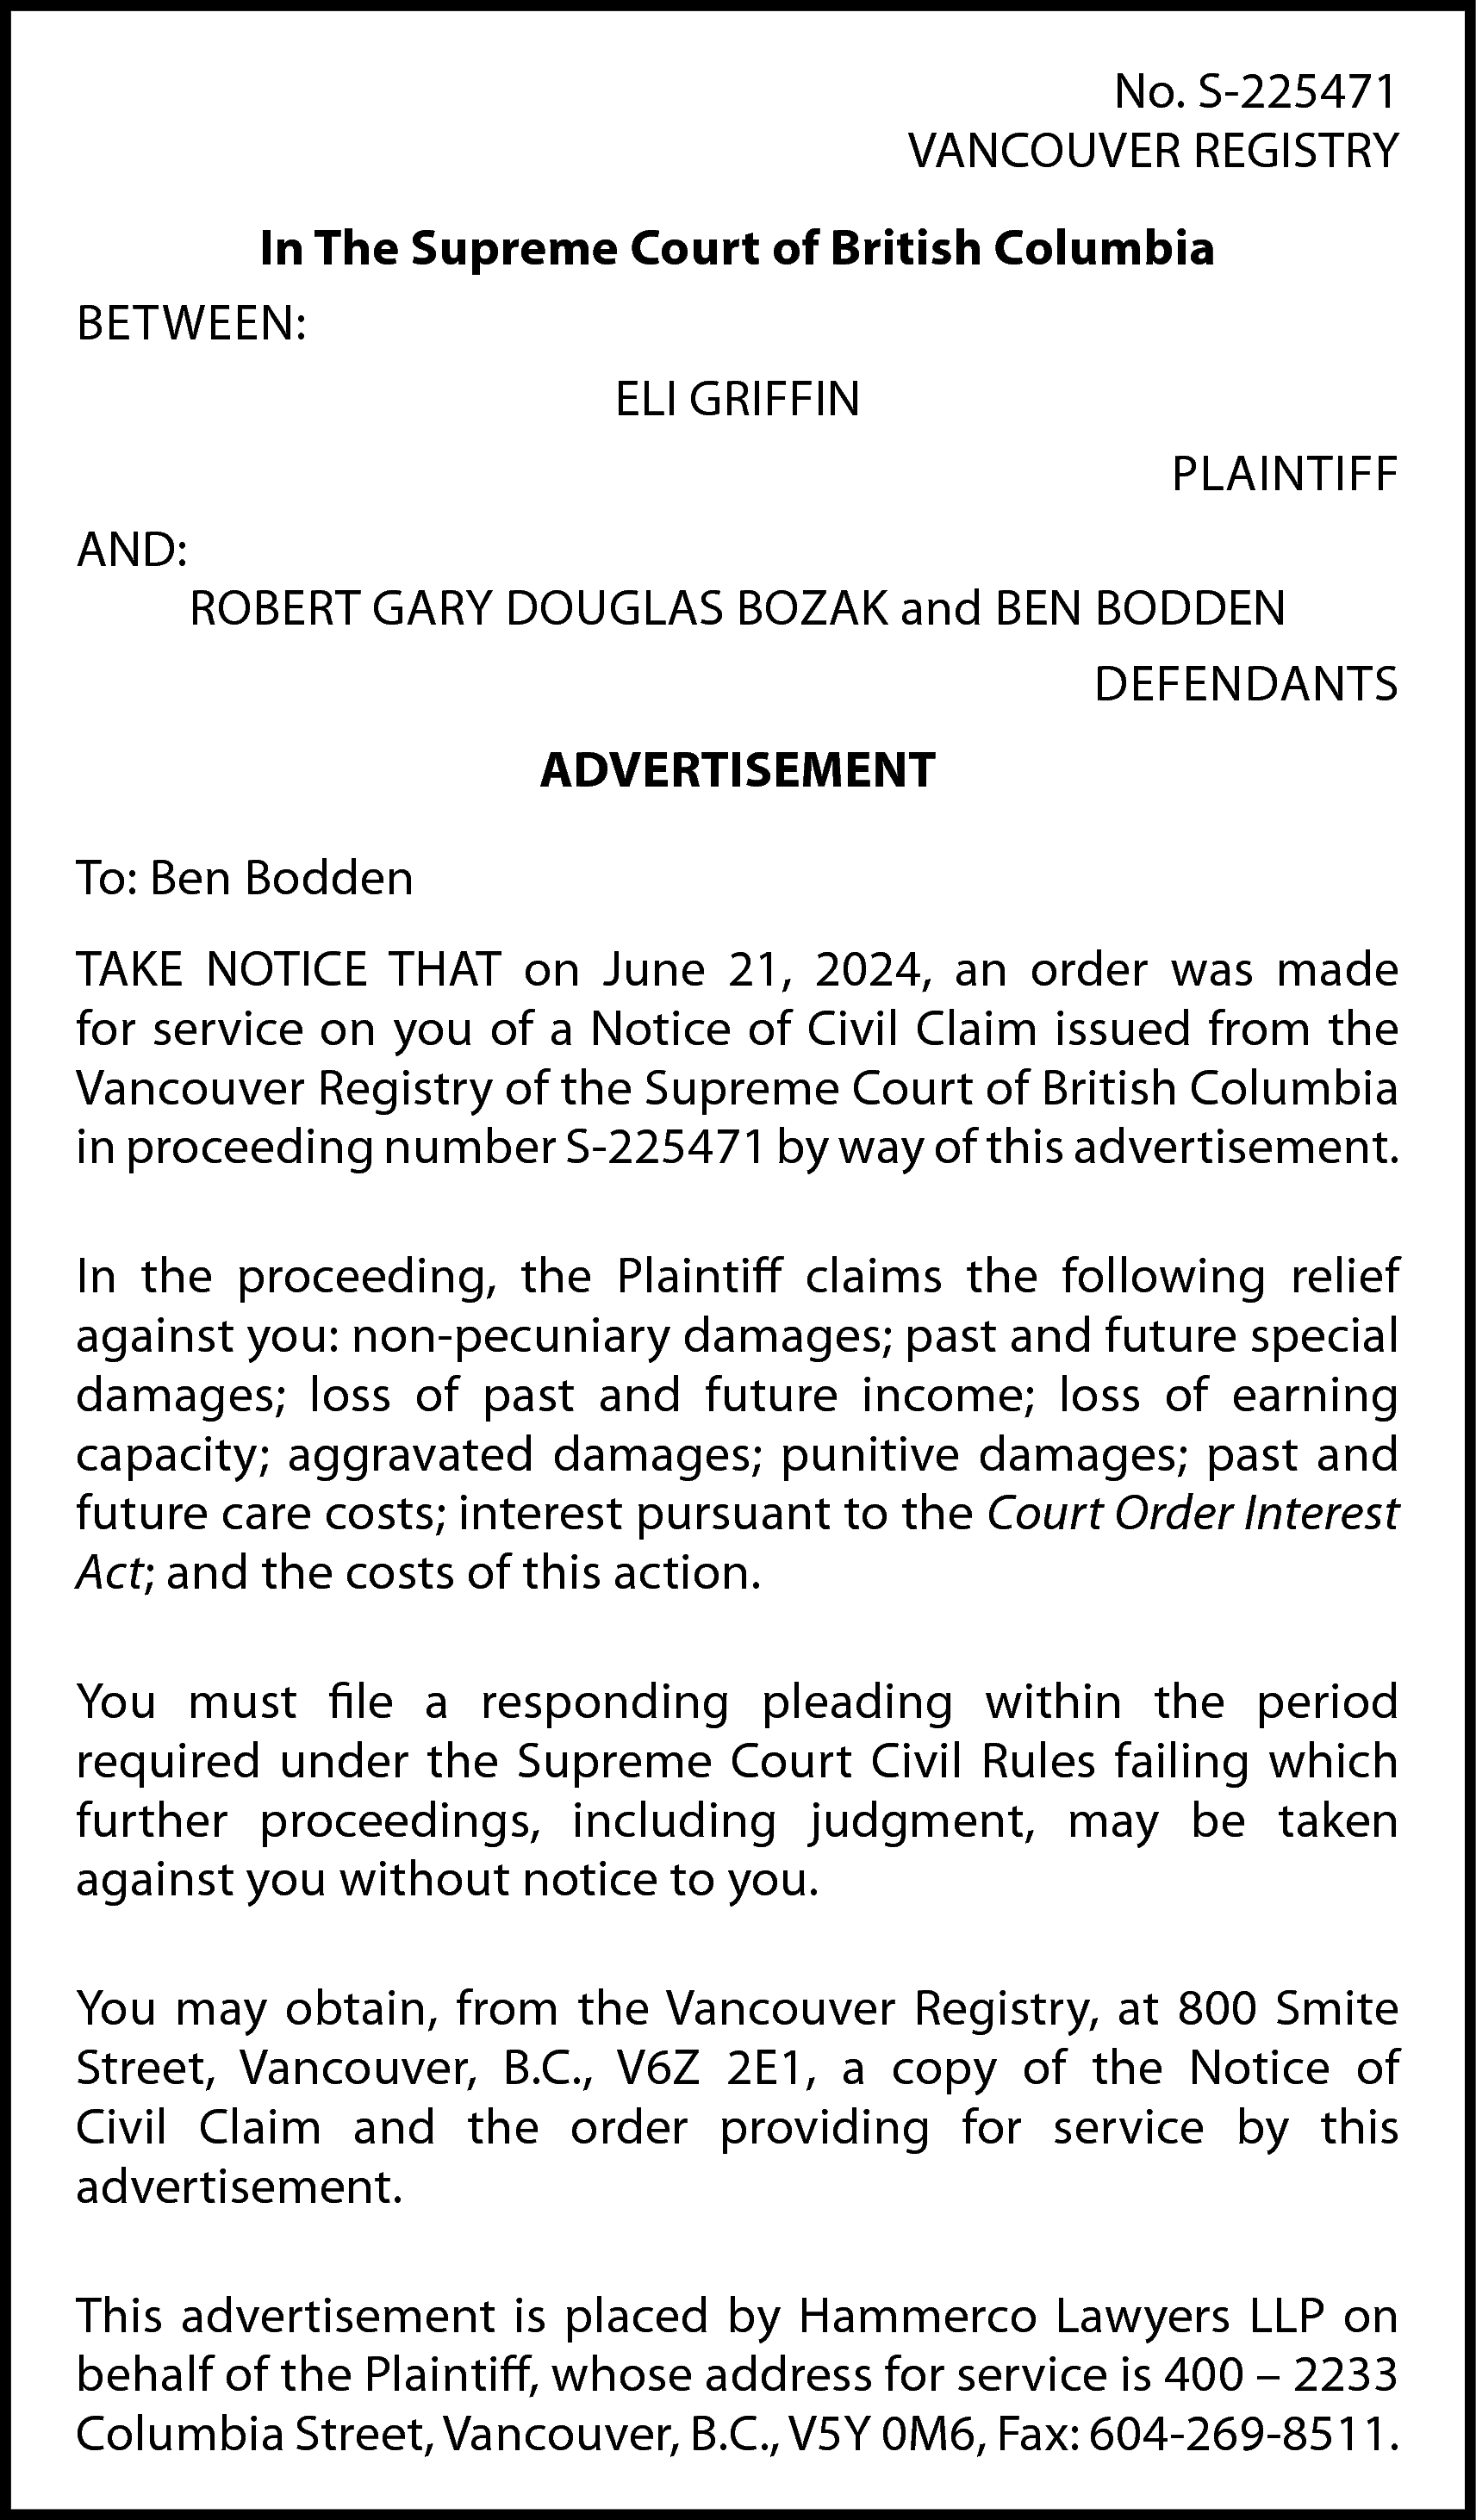 No. S-225471 <br>VANCOUVER REGISTRY <br>In  No. S-225471  VANCOUVER REGISTRY  In The Supreme Court of British Columbia  BETWEEN:  ELI GRIFFIN  PLAINTIFF  AND:  ROBERT GARY DOUGLAS BOZAK and BEN BODDEN  DEFENDANTS  ADVERTISEMENT  To: Ben Bodden  TAKE NOTICE THAT on June 21, 2024, an order was made  for service on you of a Notice of Civil Claim issued from the  Vancouver Registry of the Supreme Court of British Columbia  in proceeding number S-225471 by way of this advertisement.  In the proceeding, the Plaintiff claims the following relief  against you: non-pecuniary damages; past and future special  damages; loss of past and future income; loss of earning  capacity; aggravated damages; punitive damages; past and  future care costs; interest pursuant to the Court Order Interest  Act; and the costs of this action.  You must file a responding pleading within the period  required under the Supreme Court Civil Rules failing which  further proceedings, including judgment, may be taken  against you without notice to you.  You may obtain, from the Vancouver Registry, at 800 Smite  Street, Vancouver, B.C., V6Z 2E1, a copy of the Notice of  Civil Claim and the order providing for service by this  advertisement.  This advertisement is placed by Hammerco Lawyers LLP on  behalf of the Plaintiff, whose address for service is 400 – 2233  Columbia Street, Vancouver, B.C., V5Y 0M6, Fax: 604-269-8511.    